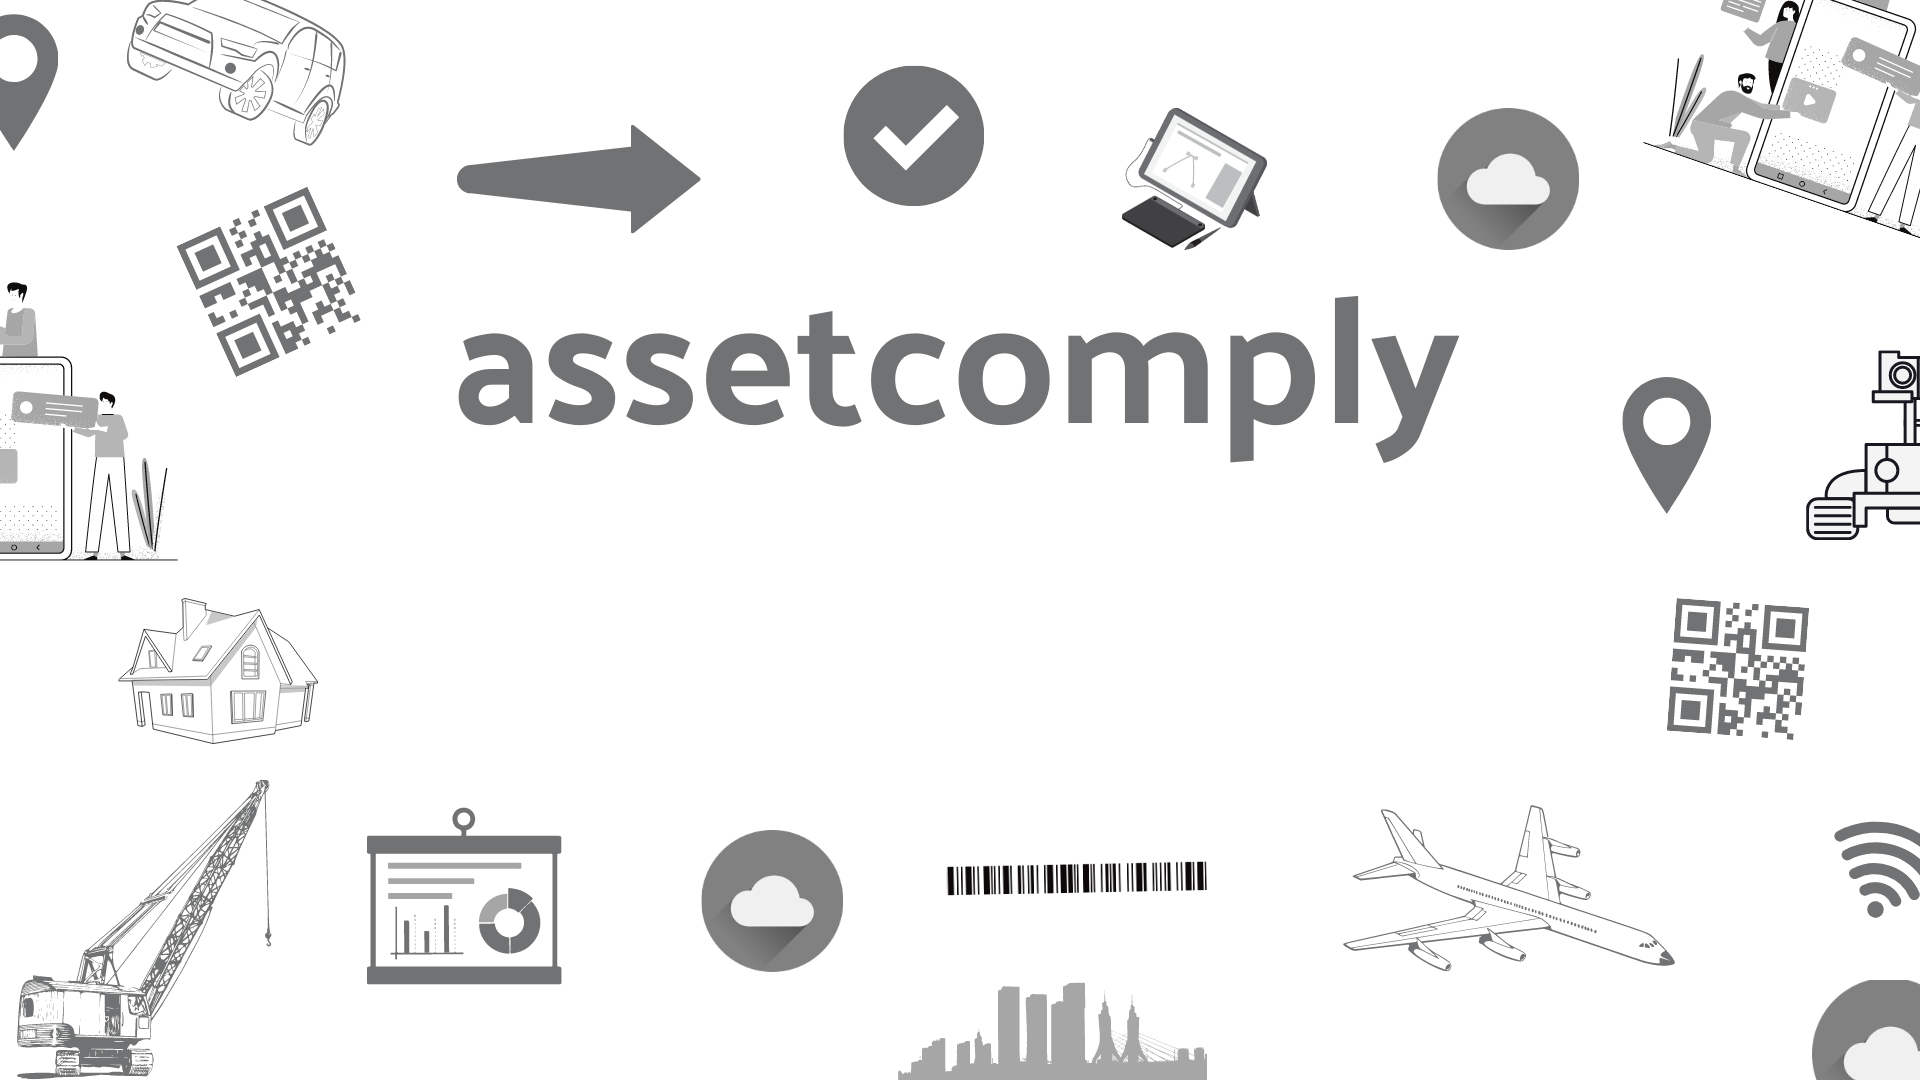 Features of assetcomply